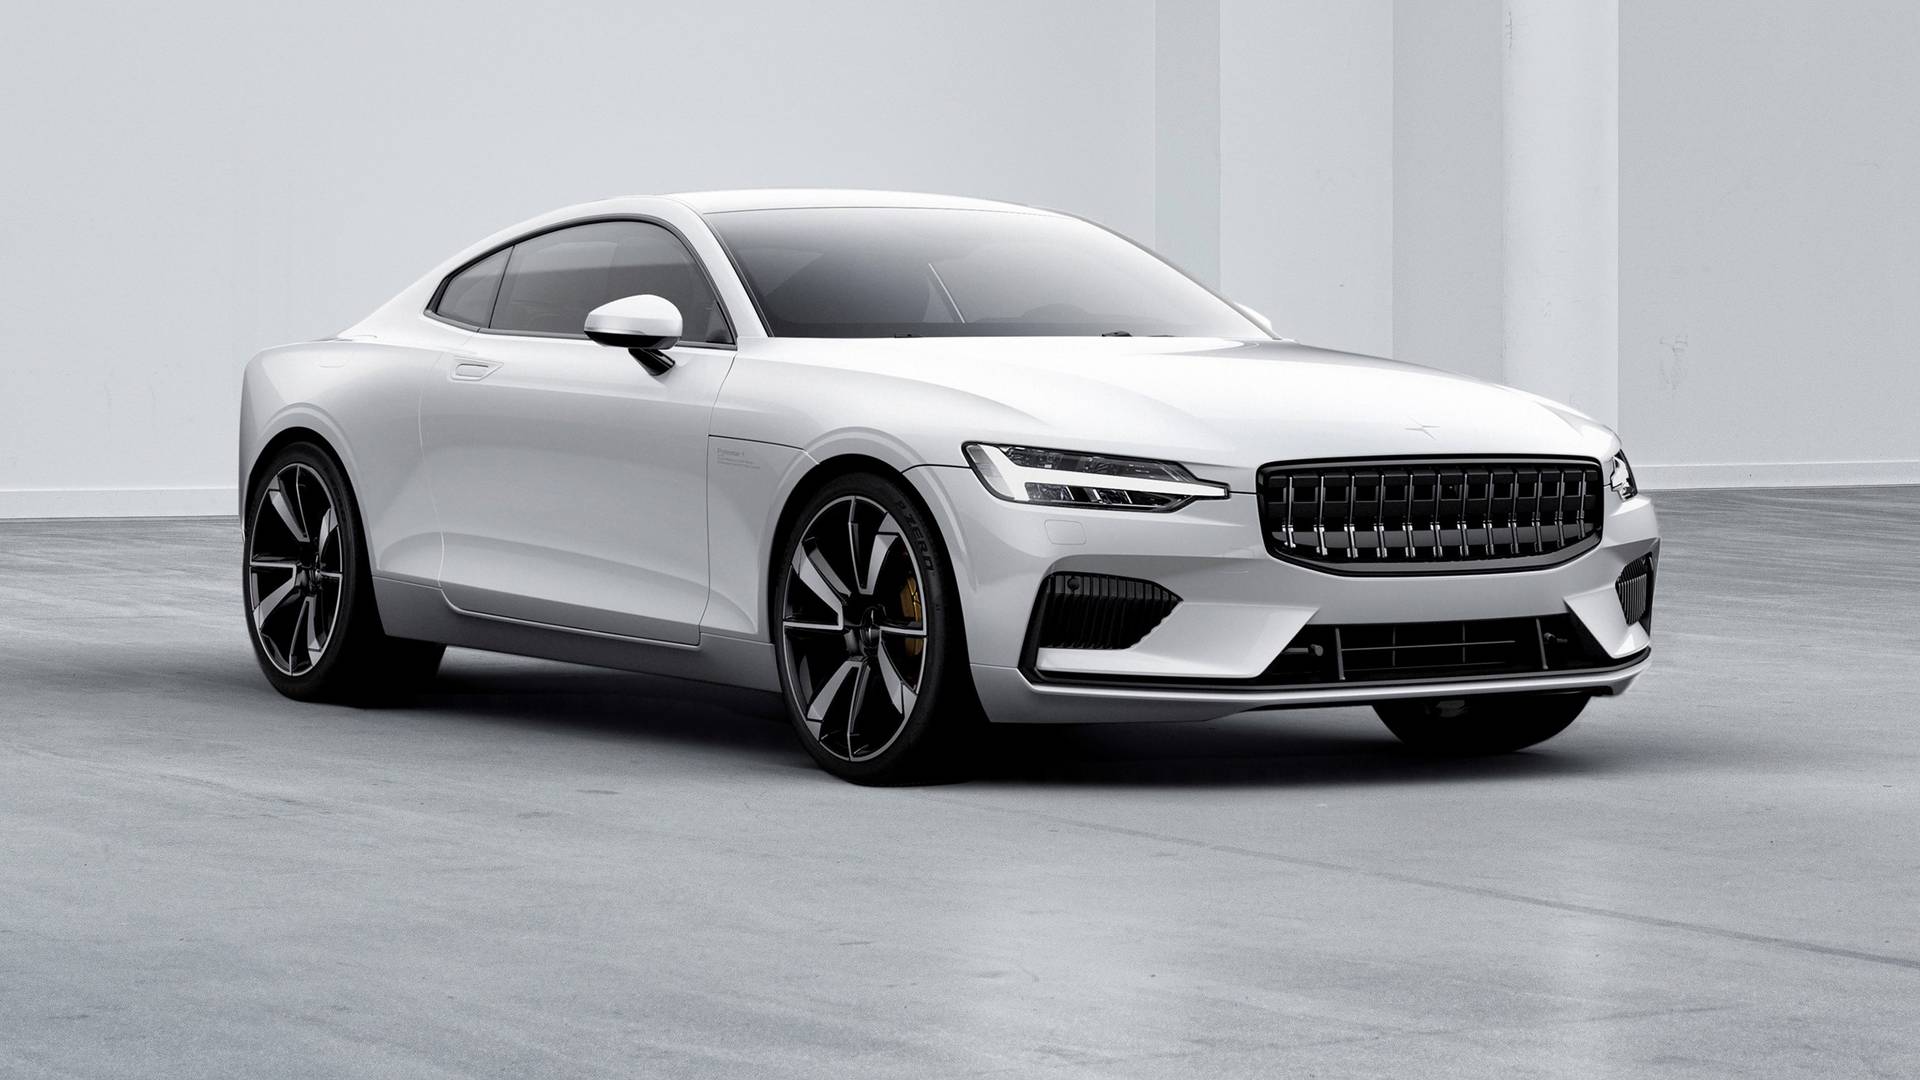 Polestar 1 Goes Official With 600 HP And 93-Mile Electric Range